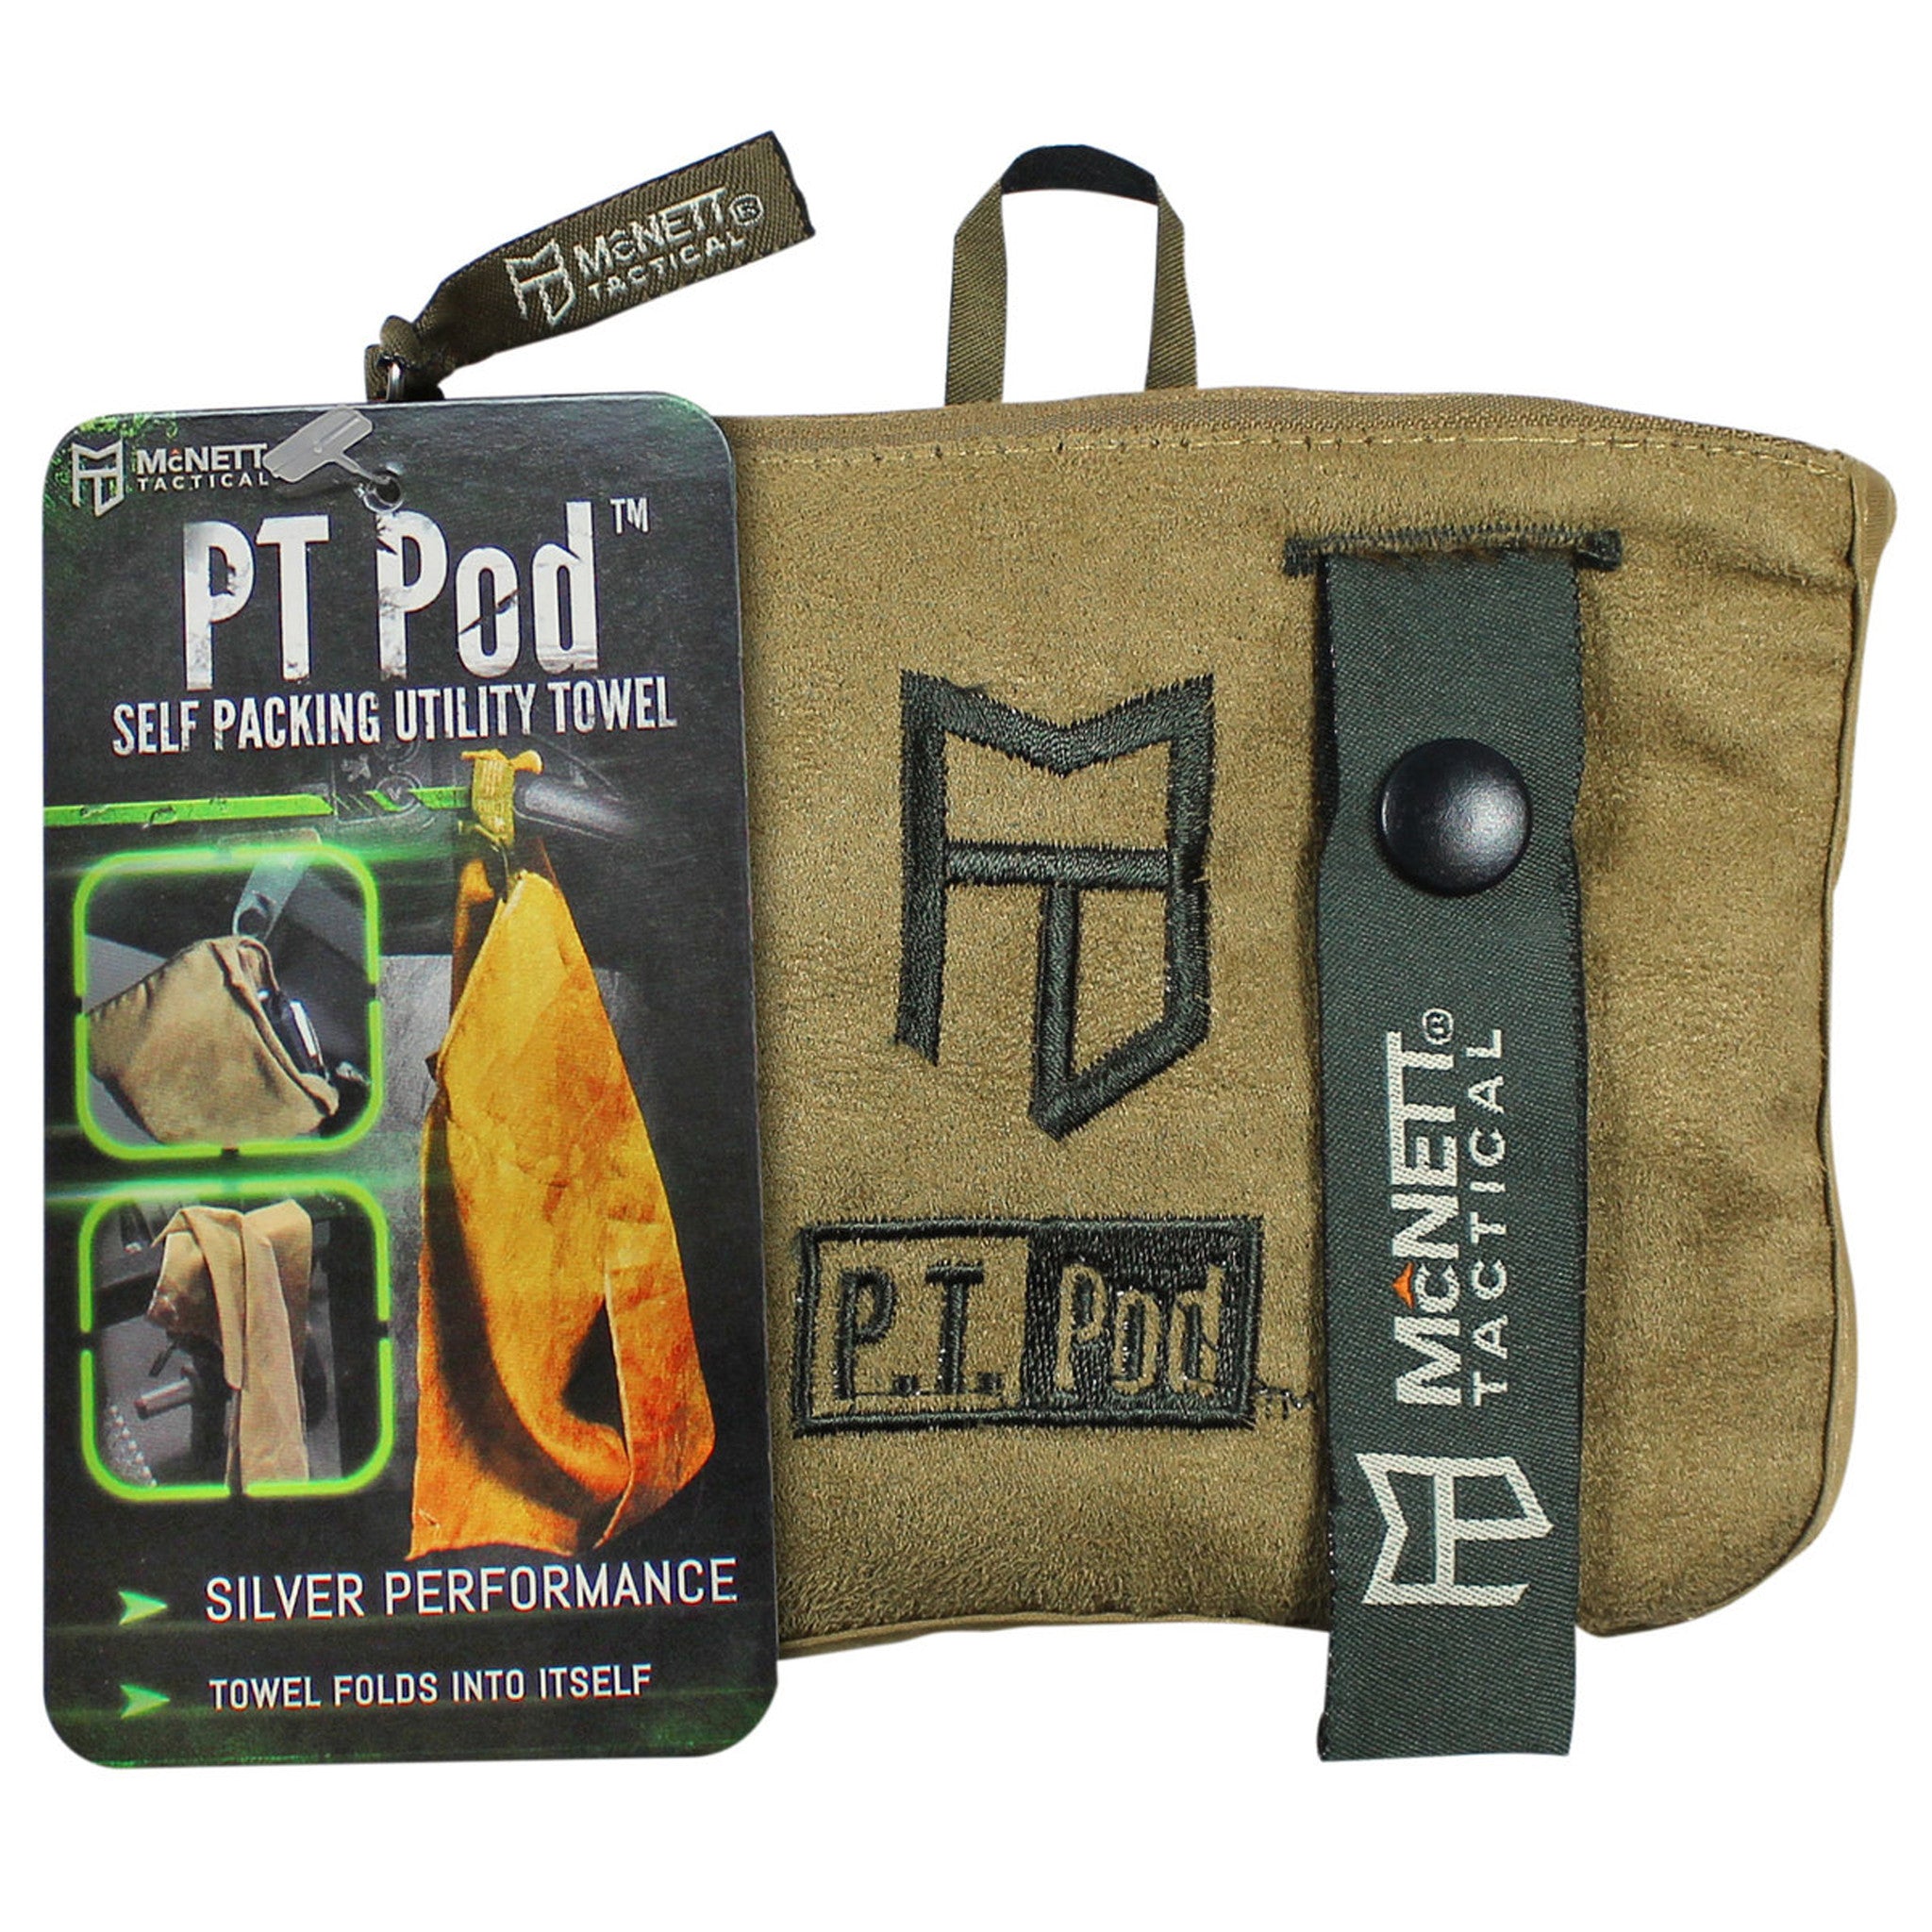 Pt Pod Exercise Towel For Physical Fitness Training Gear Aid